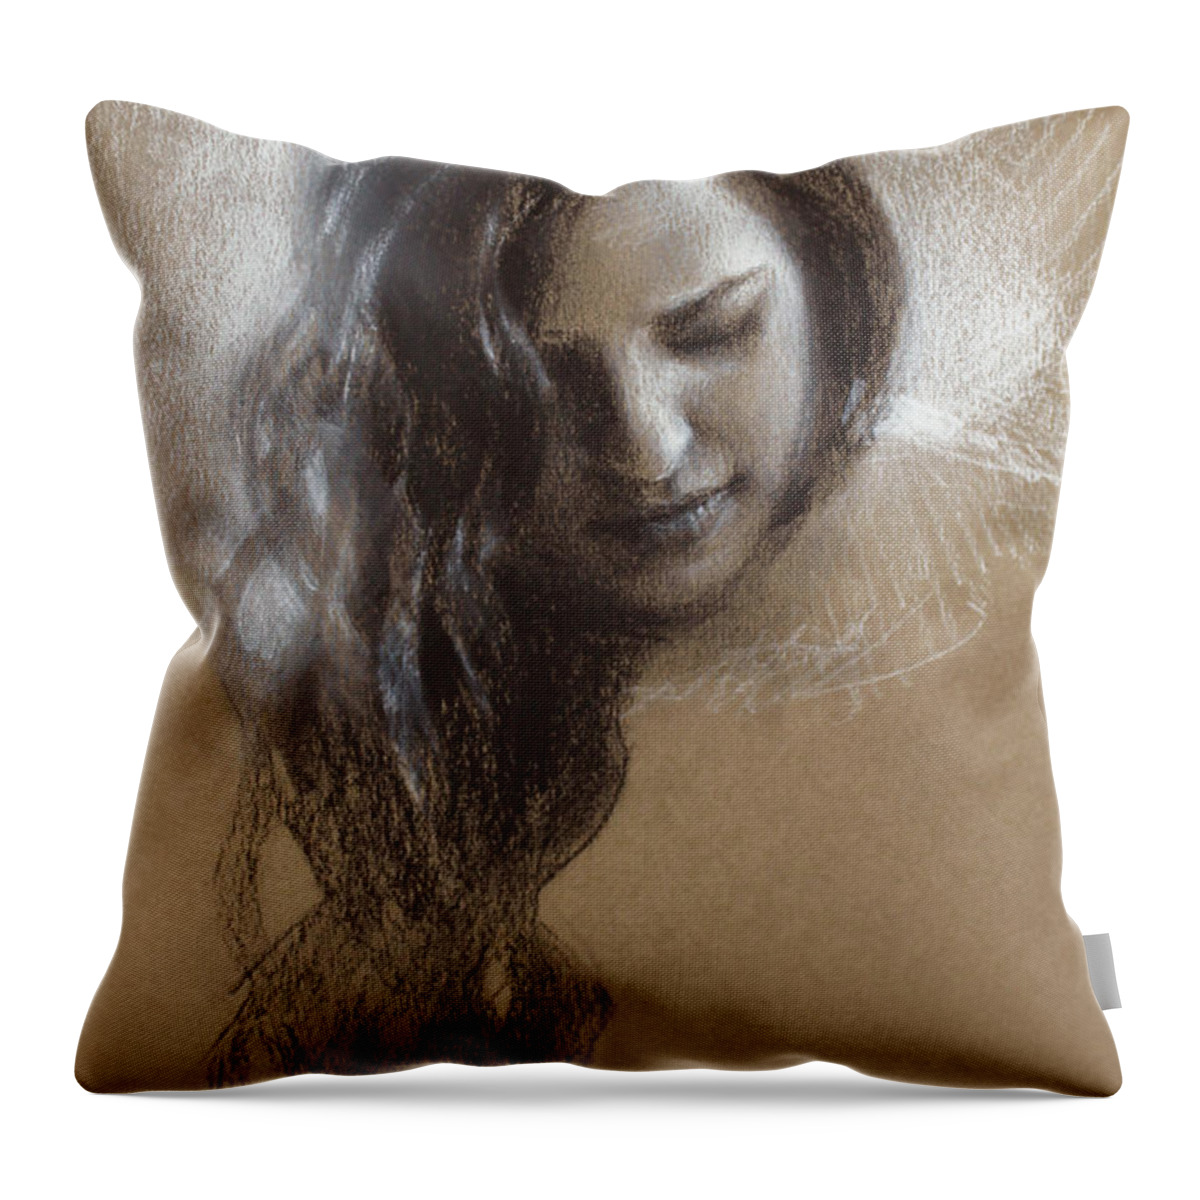 Charcoal Throw Pillow featuring the painting Sketch of Samantha by K Whitworth